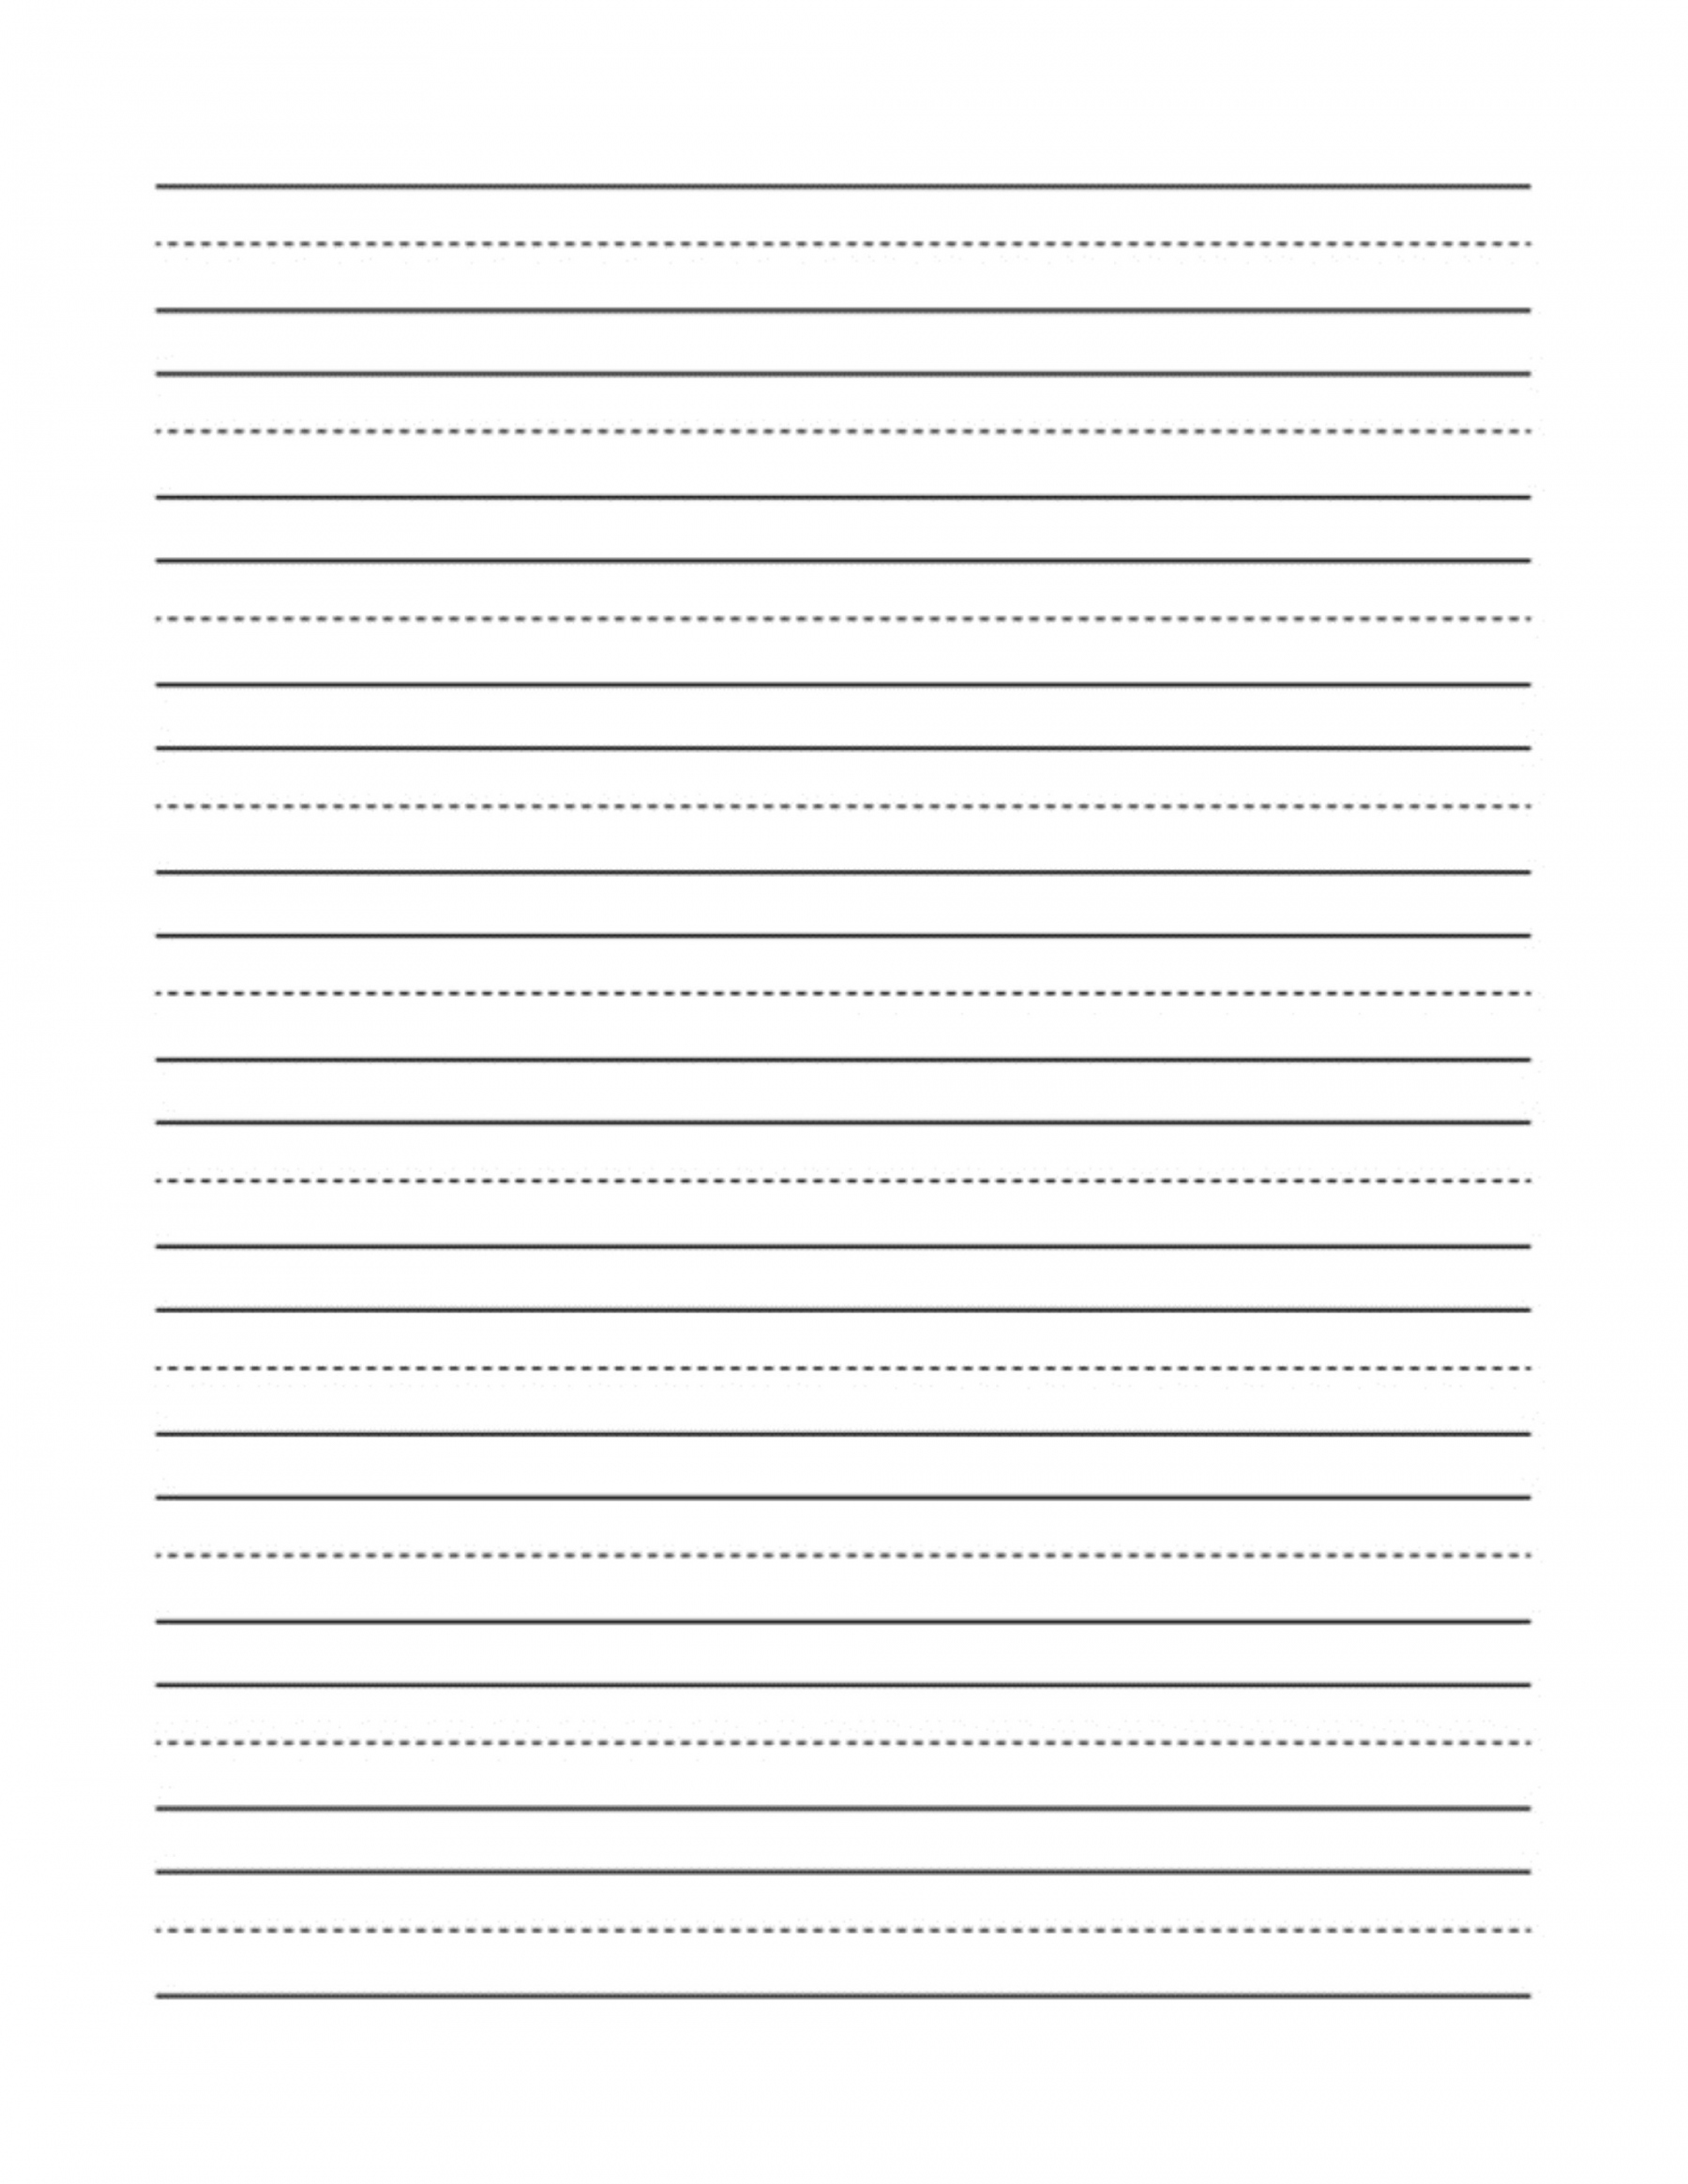 Cursive Handwriting Practice Paper Printable Download For Boys Girls and  Adults - FREE Printables - Cursive Paper